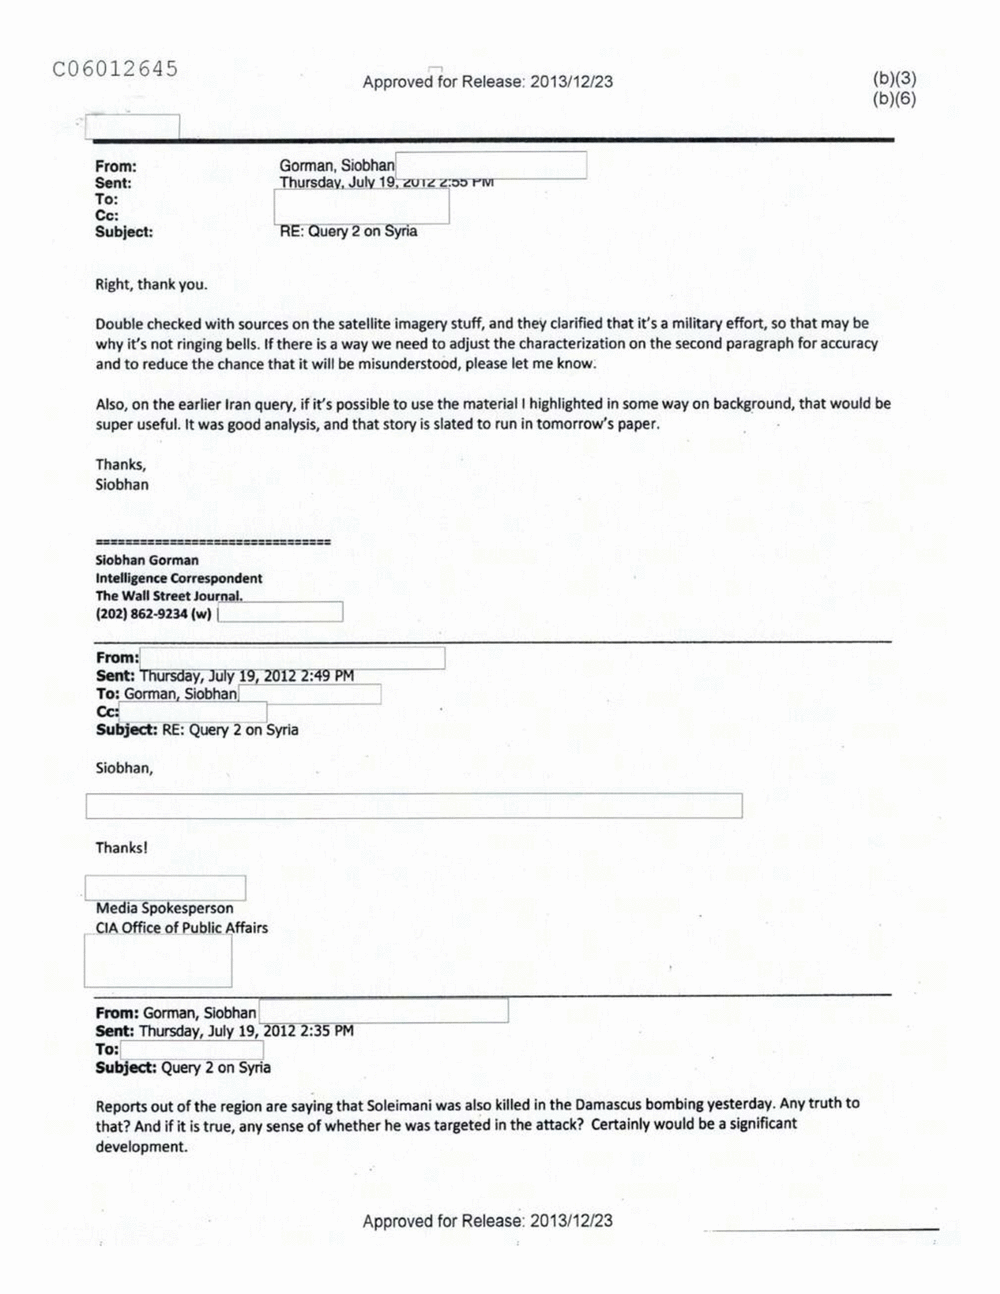 Page 214 from Email Correspondence Between Reporters and CIA Flacks